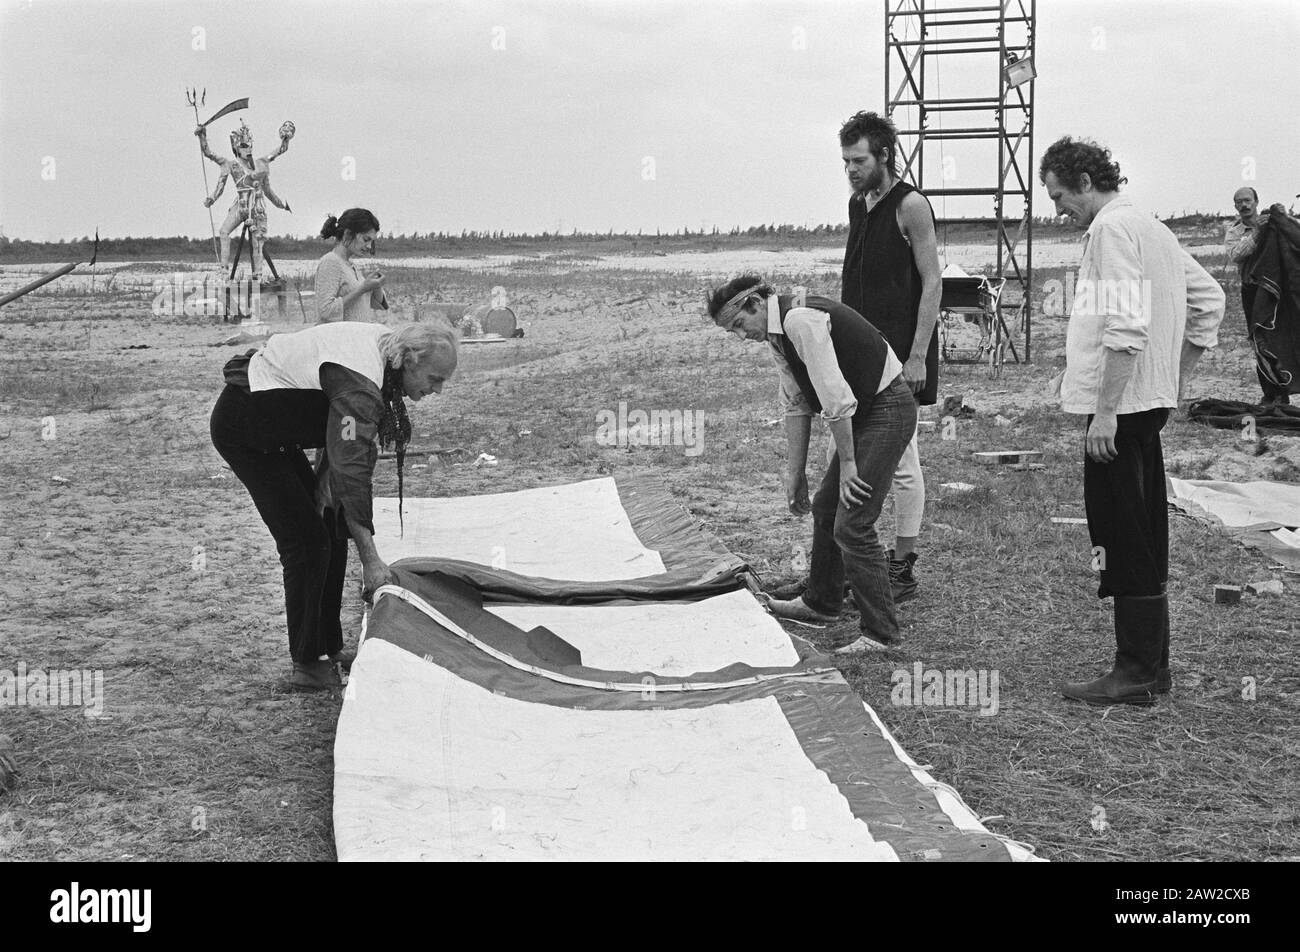 Press conference in tent Ruigoord alternative movement; 6, 9 :, 7, 8: Tent is set up Date: June 22, 1981 Keywords: press conferences, tents Stock Photo